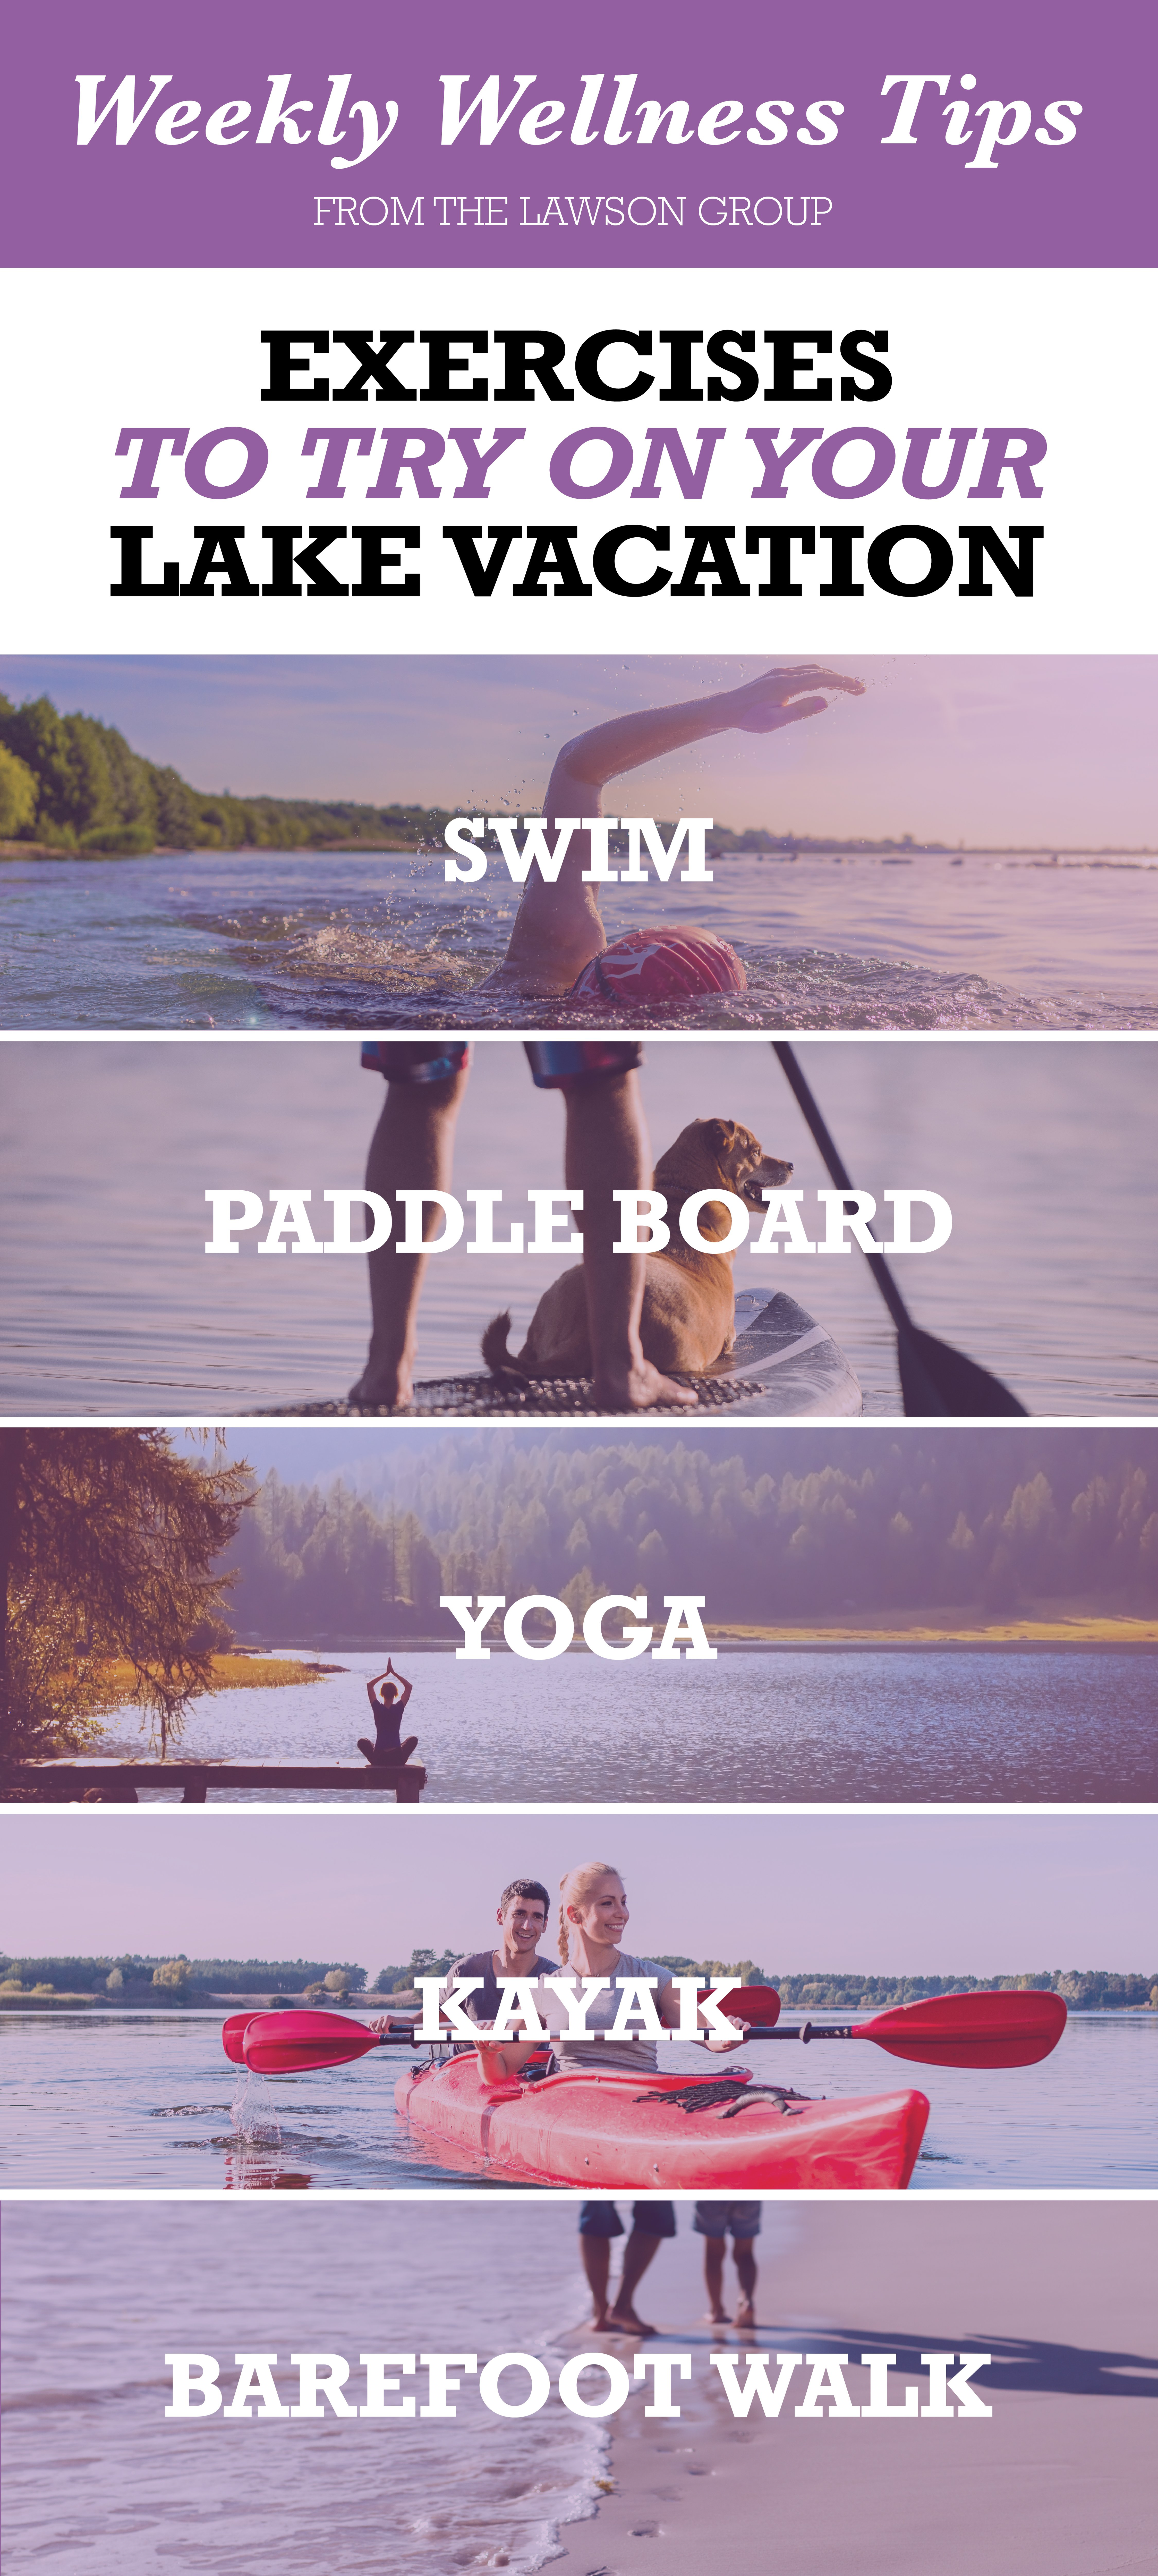 TLG22005 Wellness Tips Exercises to Try on Your Lake Vacation Infographic-1080px-01